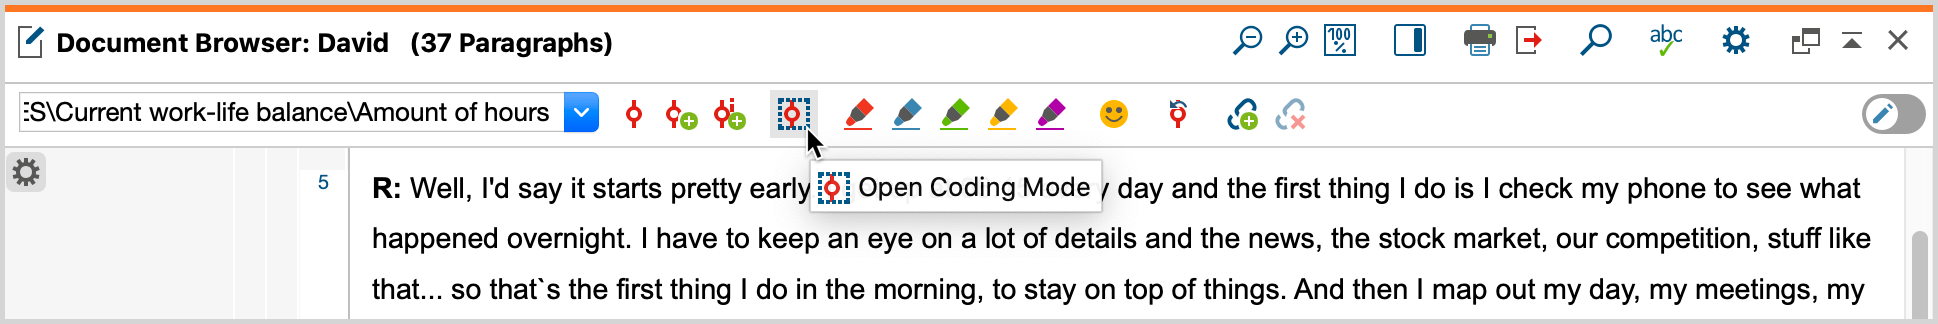 Activating the open coding mode